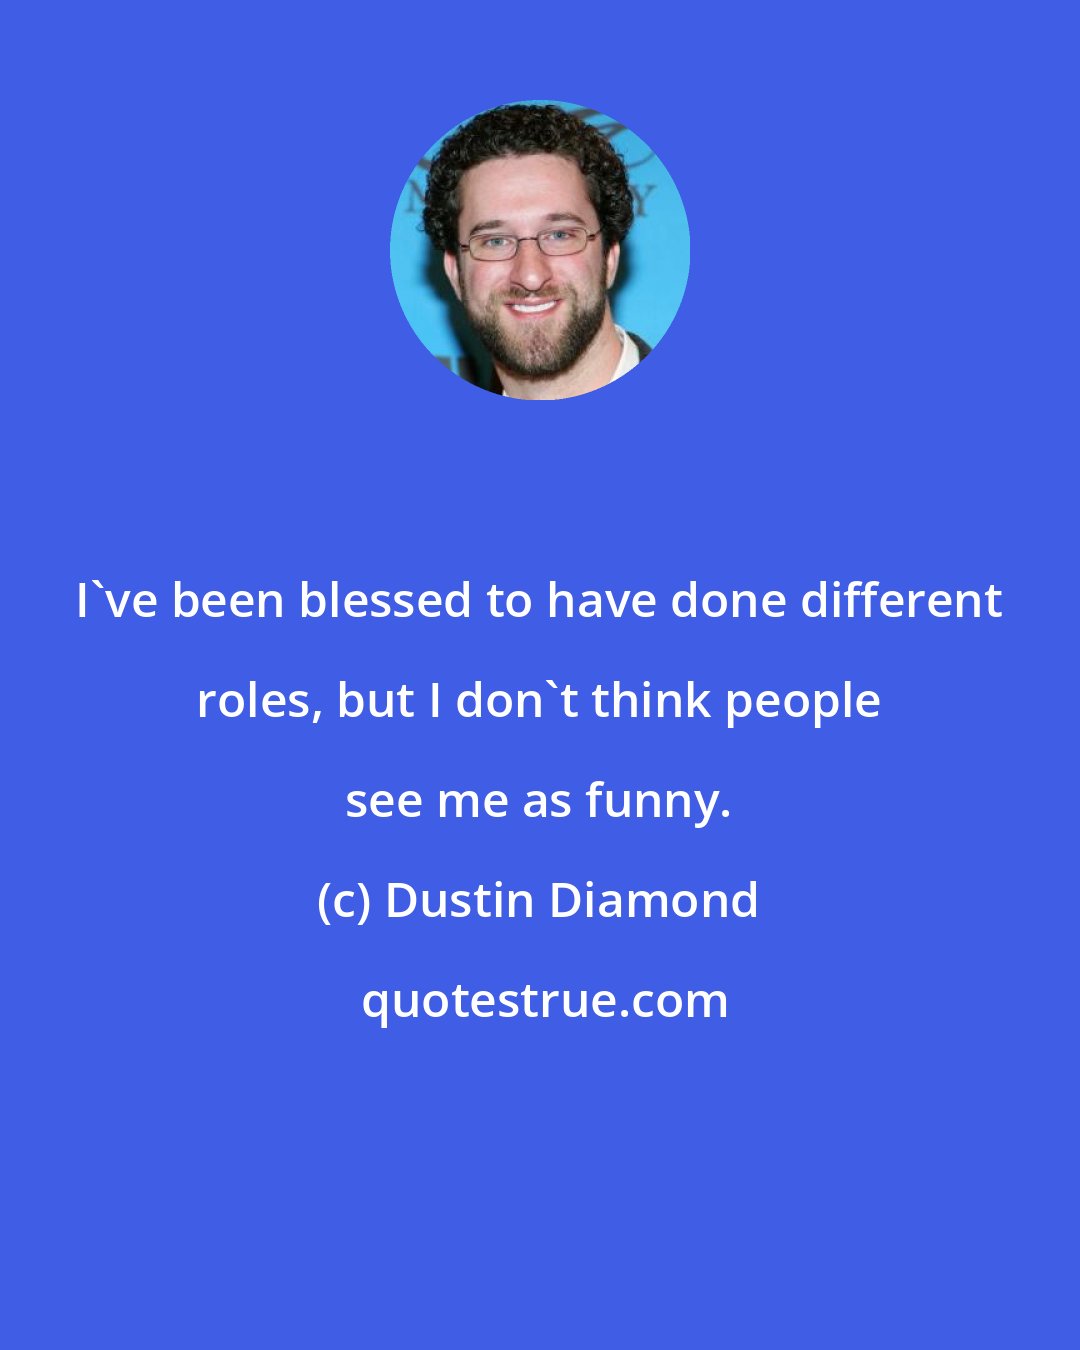 Dustin Diamond: I've been blessed to have done different roles, but I don't think people see me as funny.